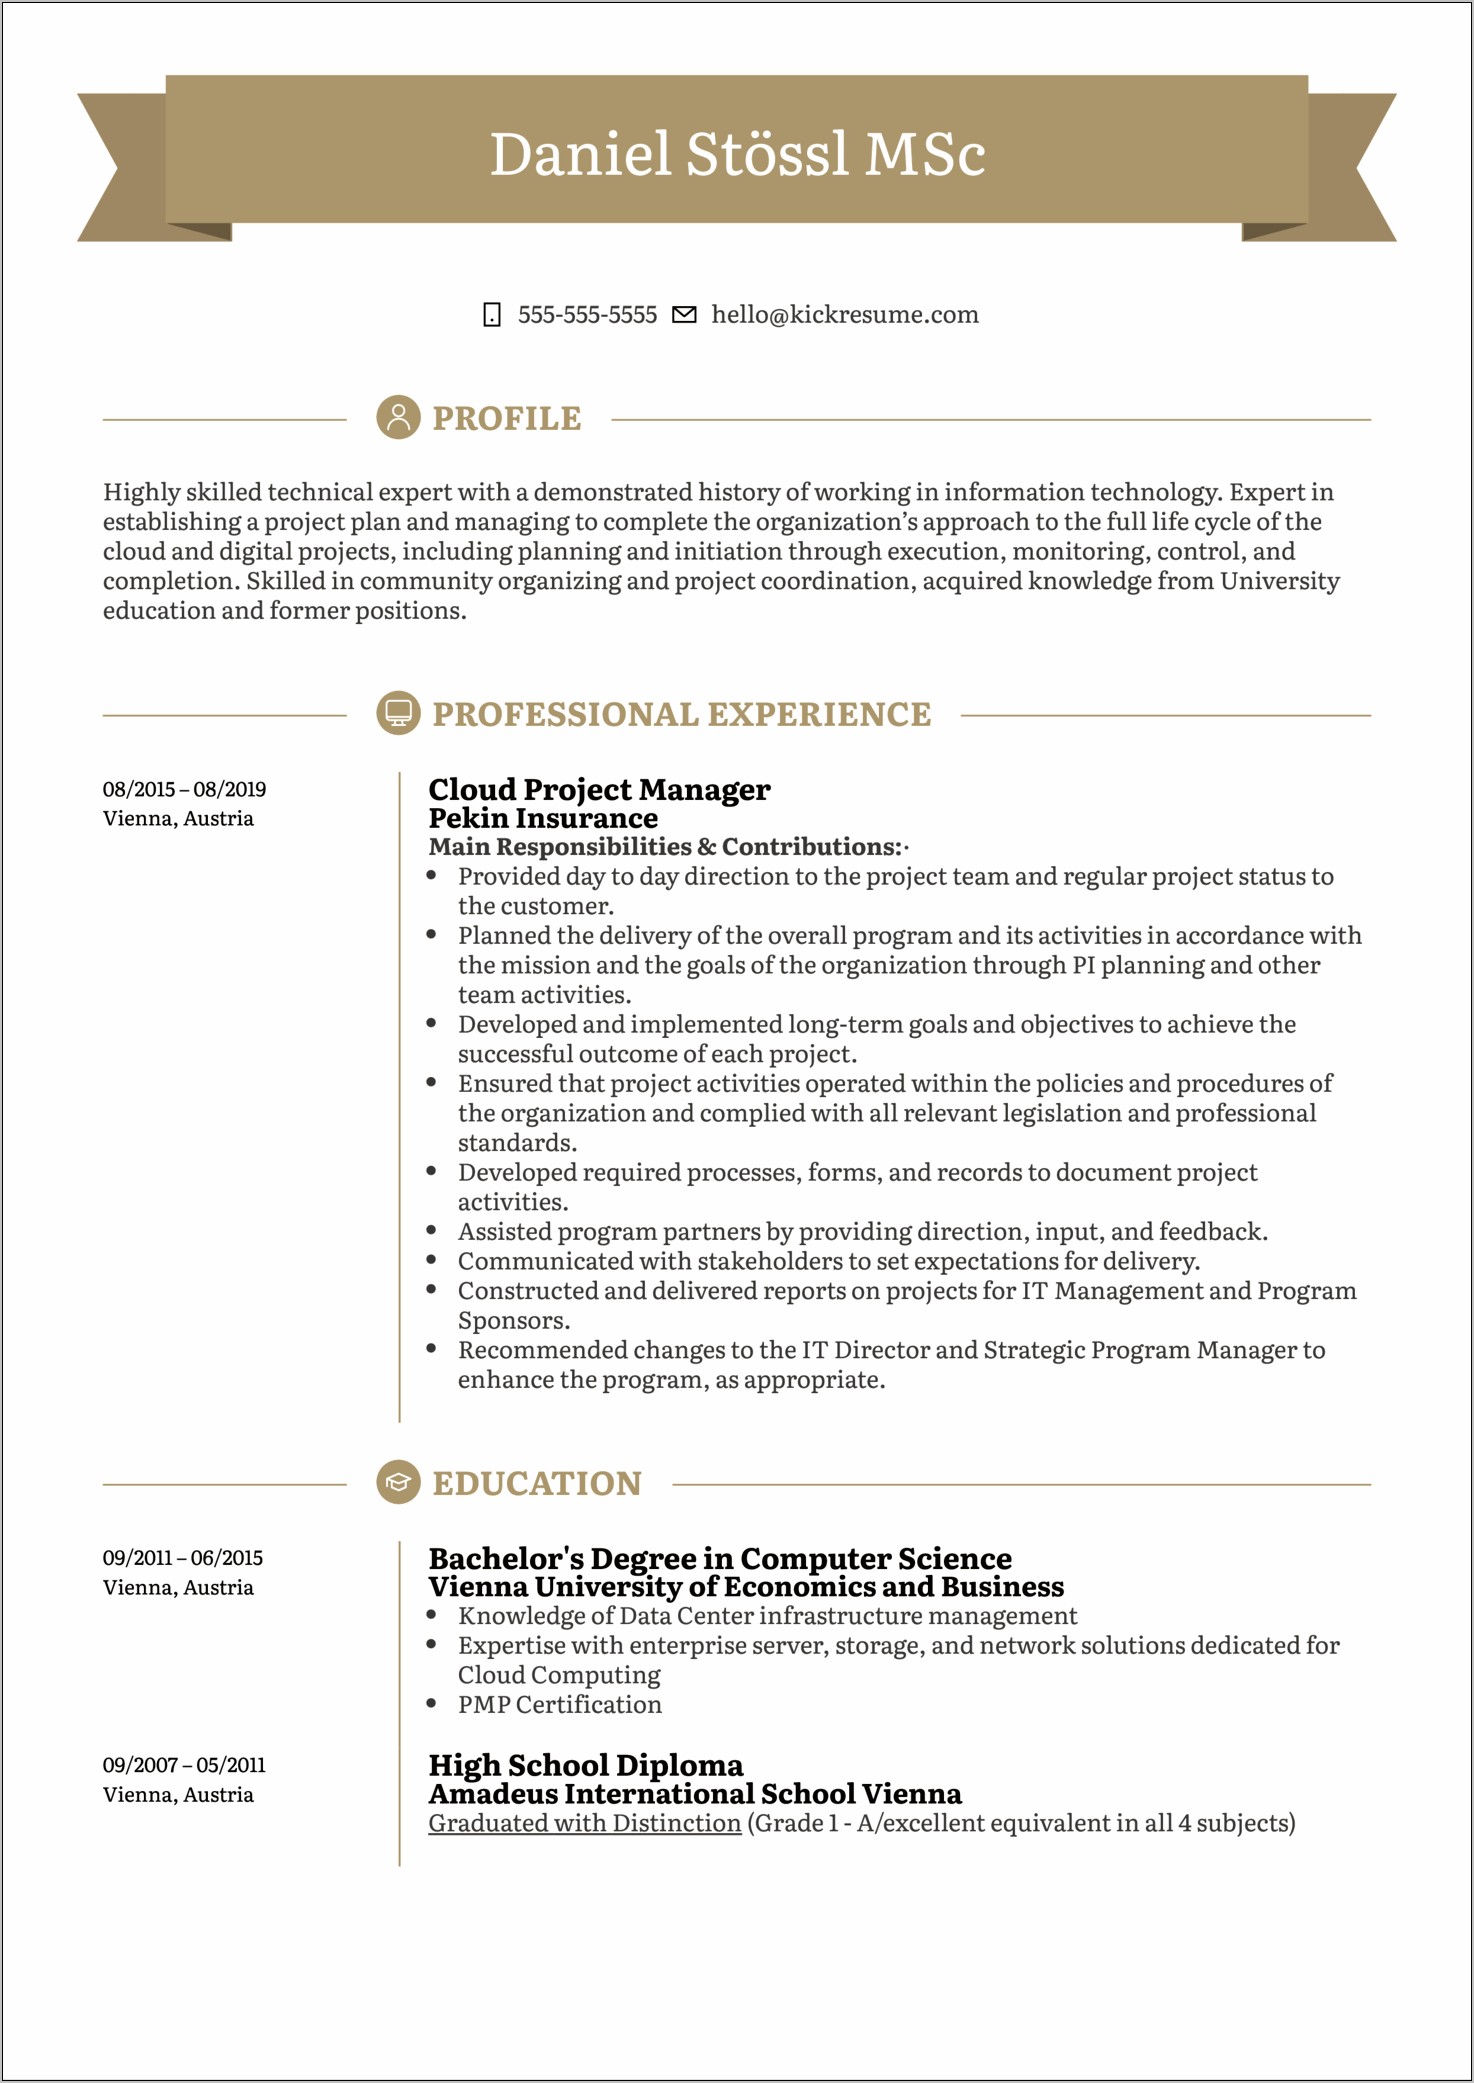 Resume Data Center Operations Manager